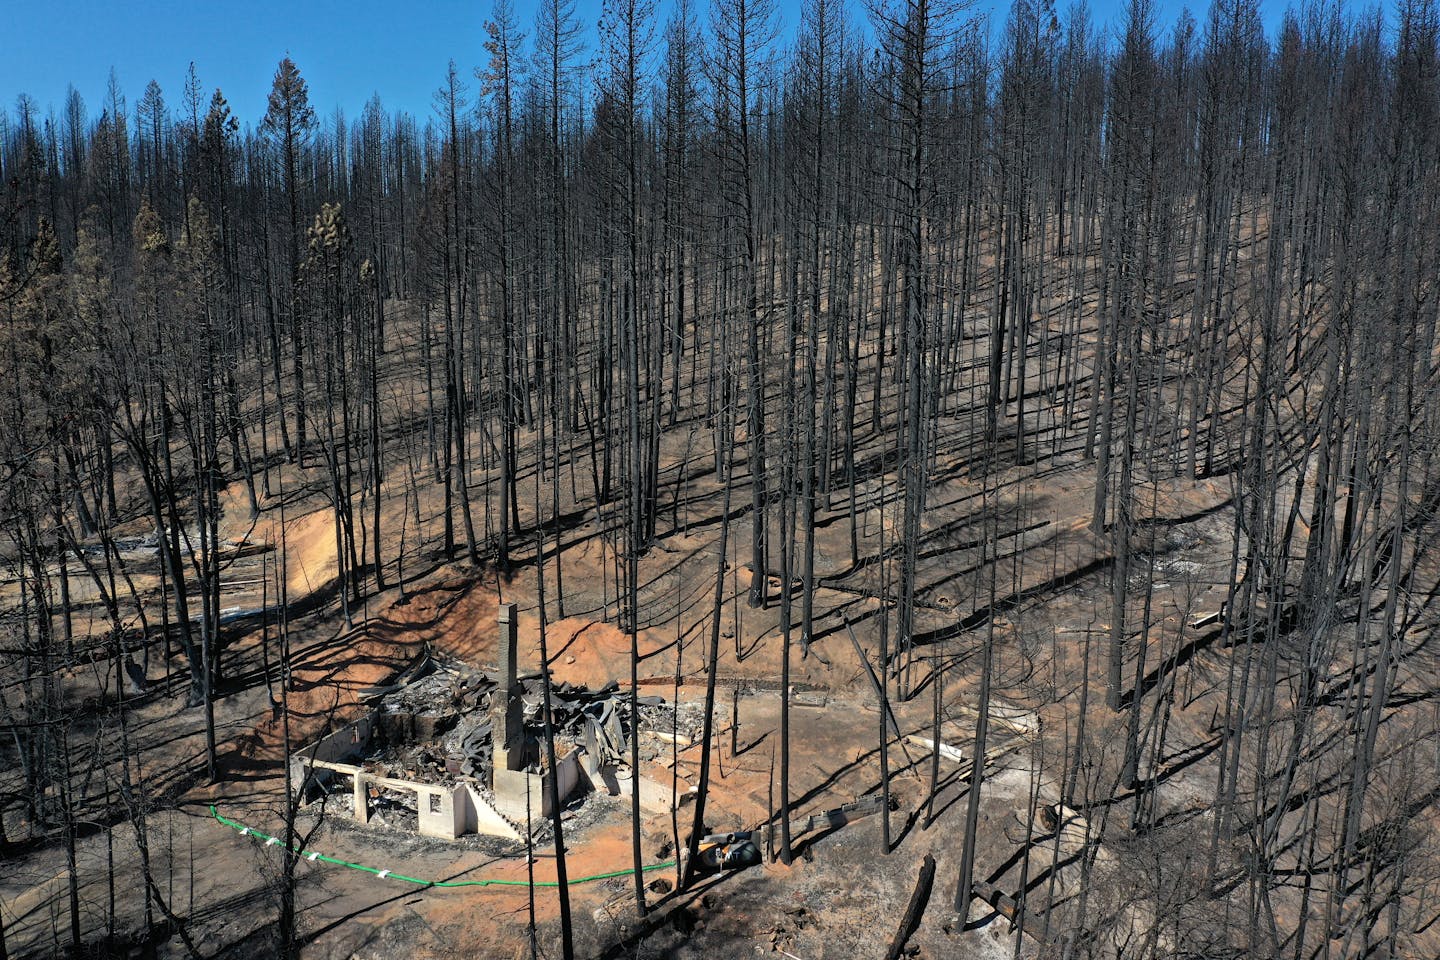 Burned trees on a hillside with no needles and a fire-damaged home. The ground is bare.